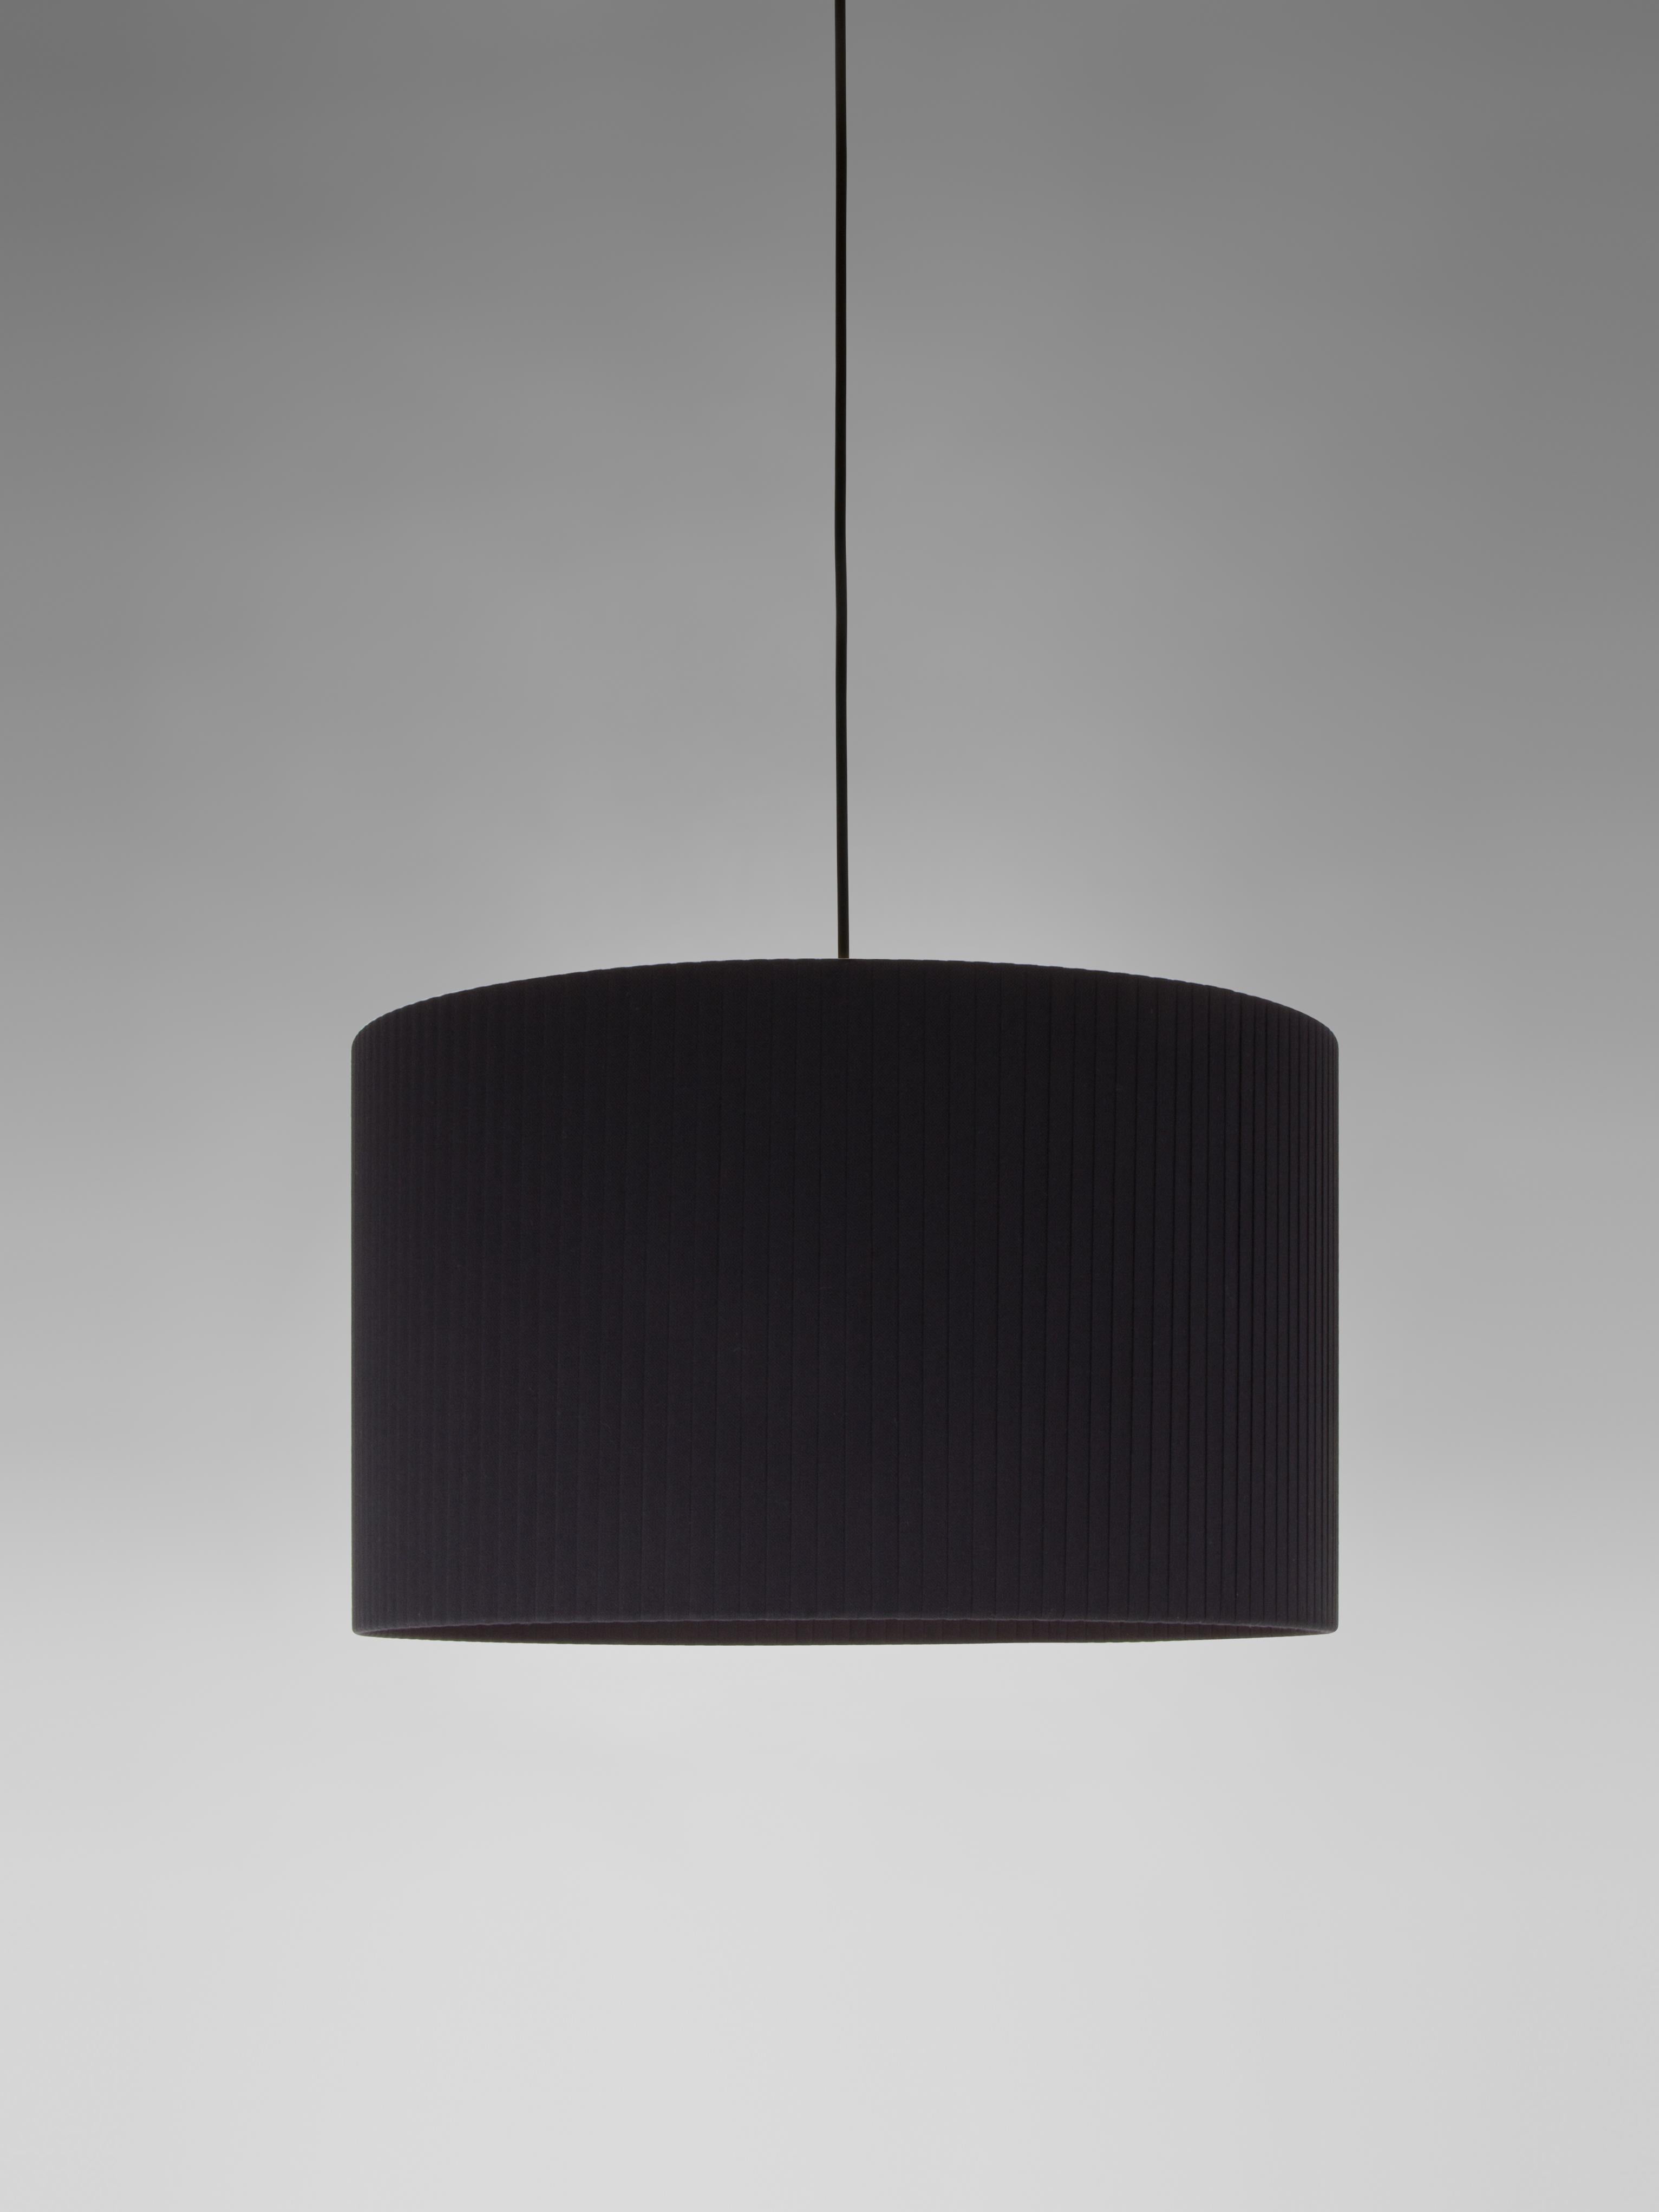 Black Sísísí Cilíndricas GT2 pendant lamp by Santa & Cole
Dimensions: D 45 x H 27 cm
Materials: Metal, ribbon.
Available in other colors.
Also available in two lights version.

Cylindrical in shape, there are two sizes: the PT2 being the small